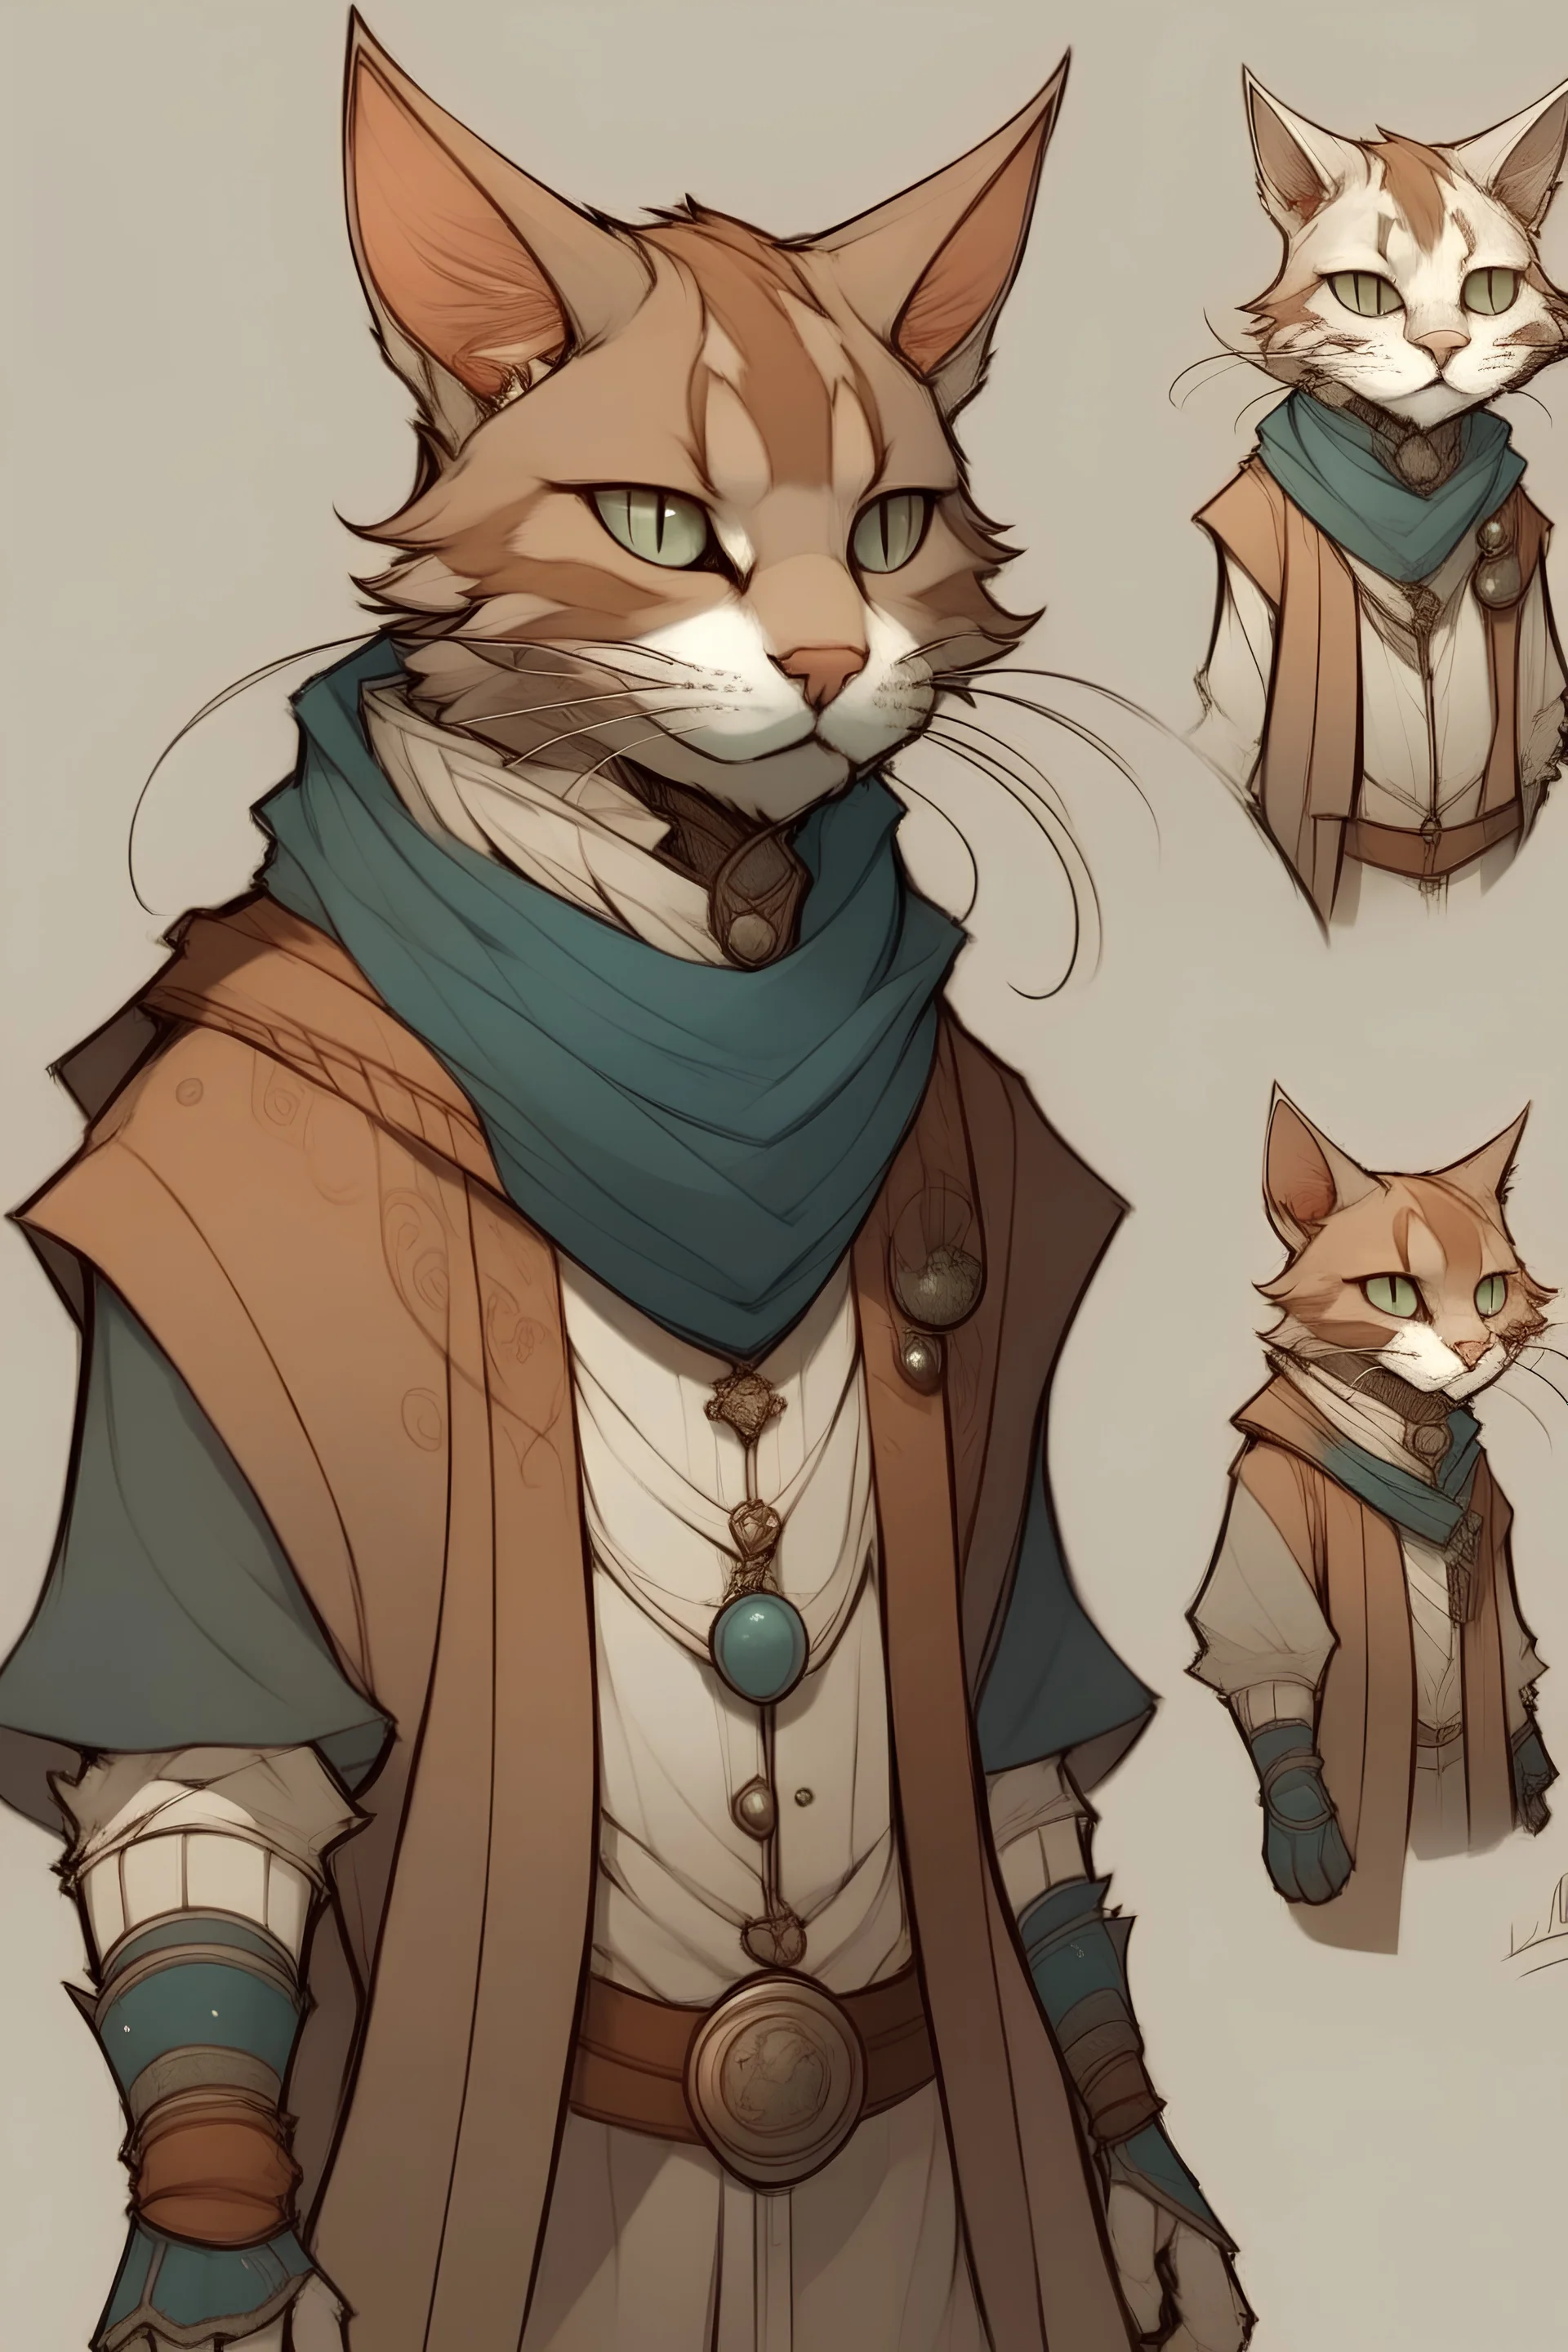 design of a humanized cat from a fantasy au